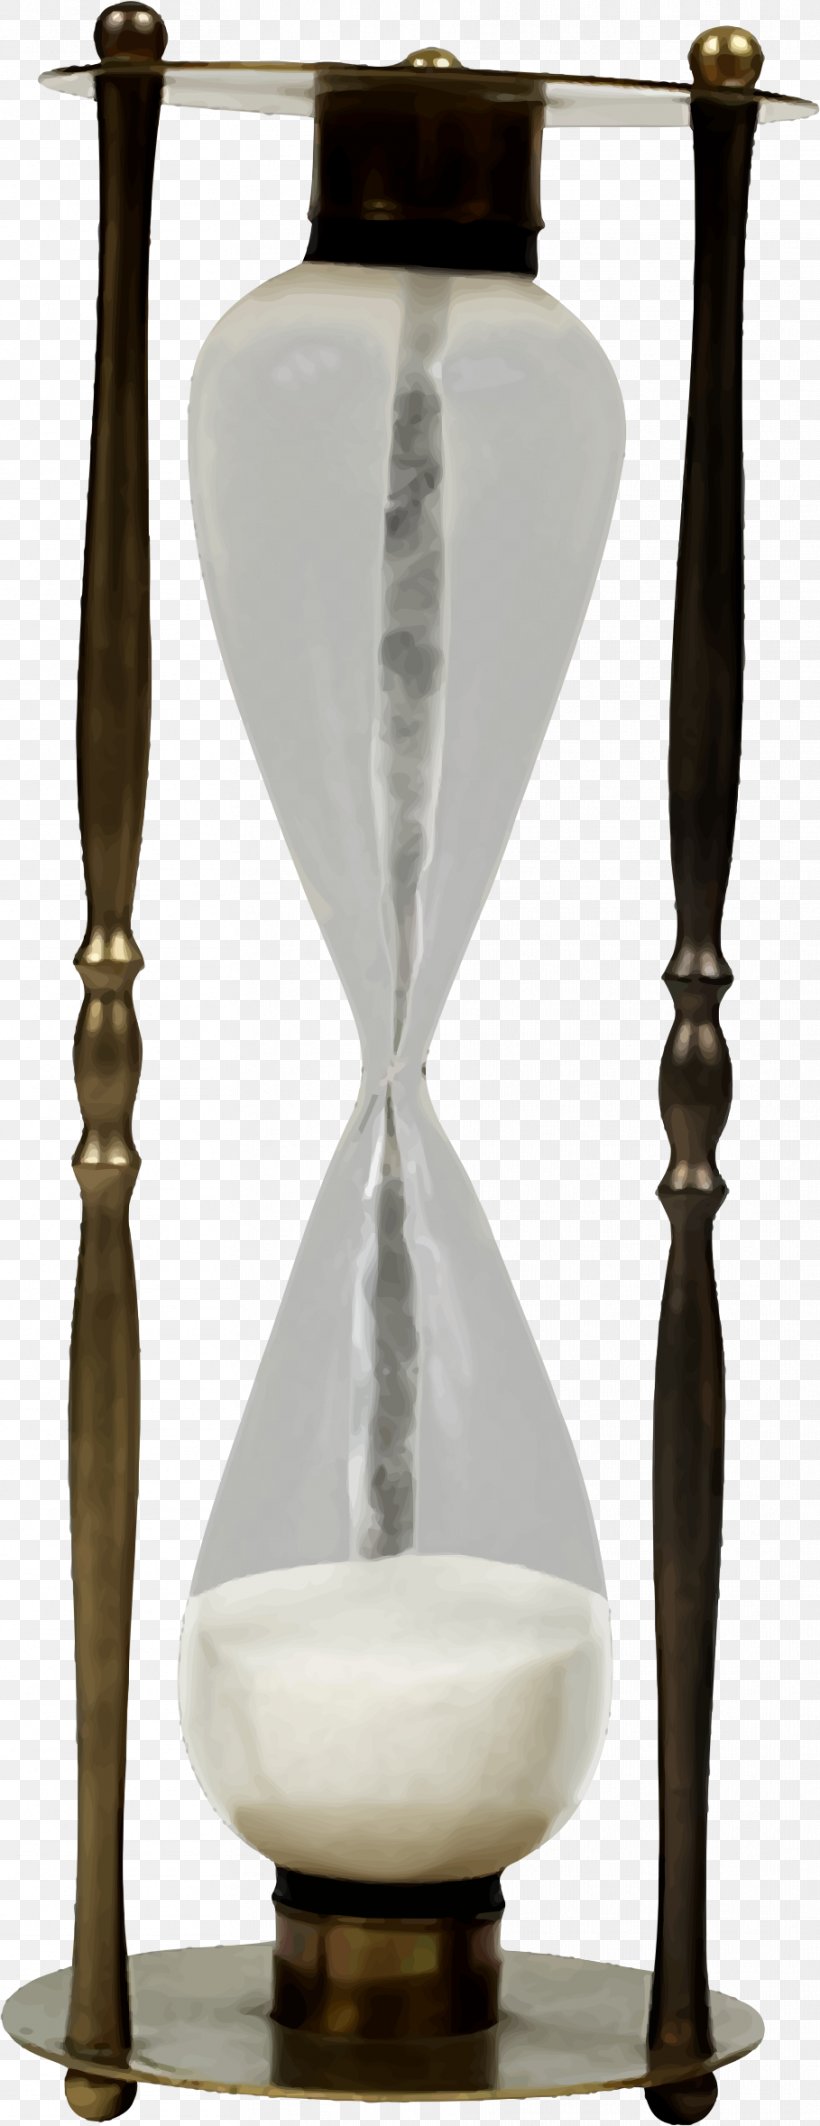 Hourglass Time England Clock, PNG, 909x2357px, Hourglass, Clock, Courage, England, Europe Download Free